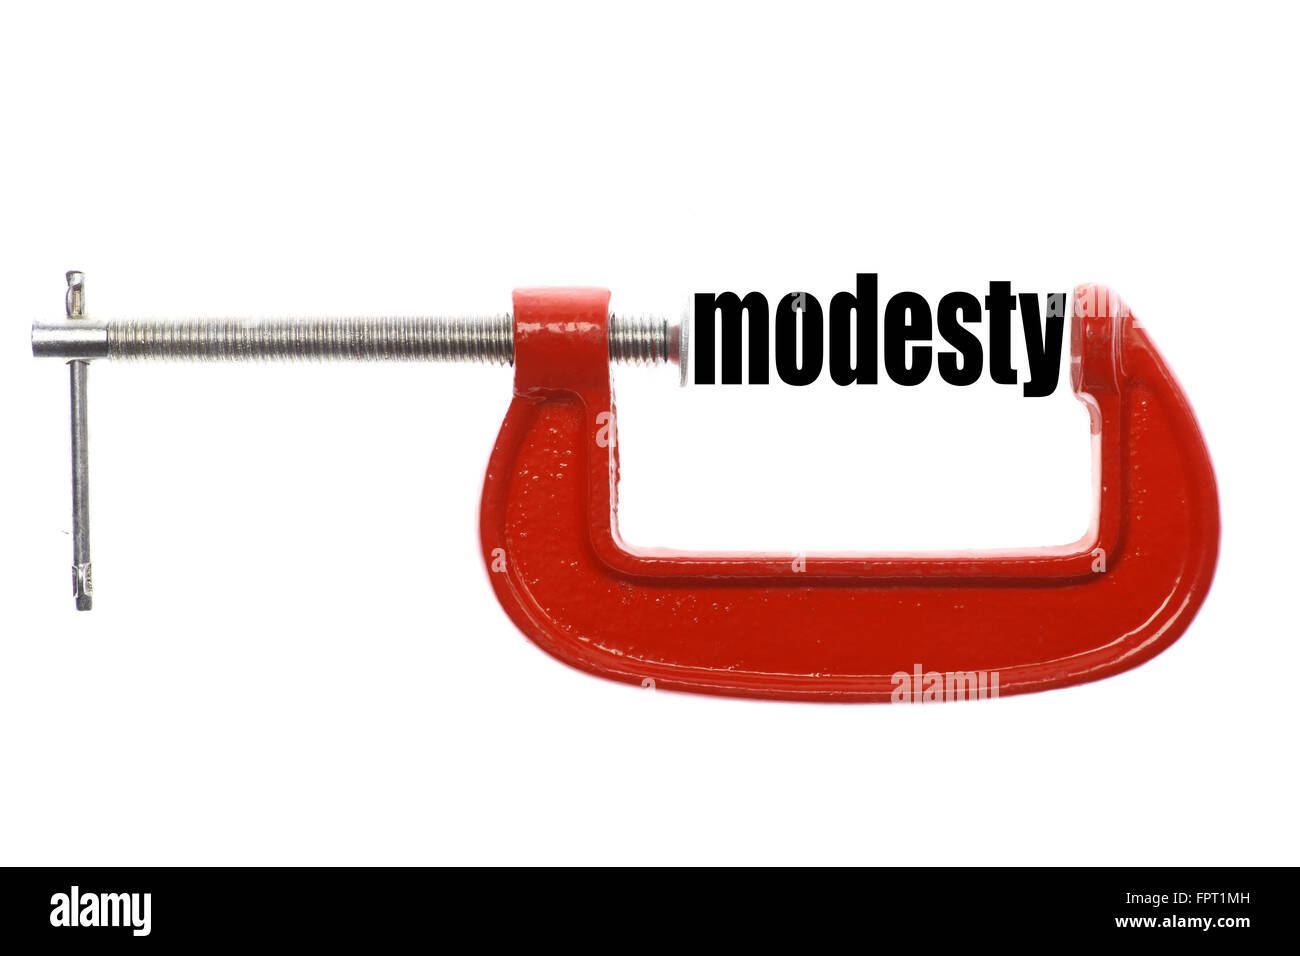 What's in a Word? - Modesty